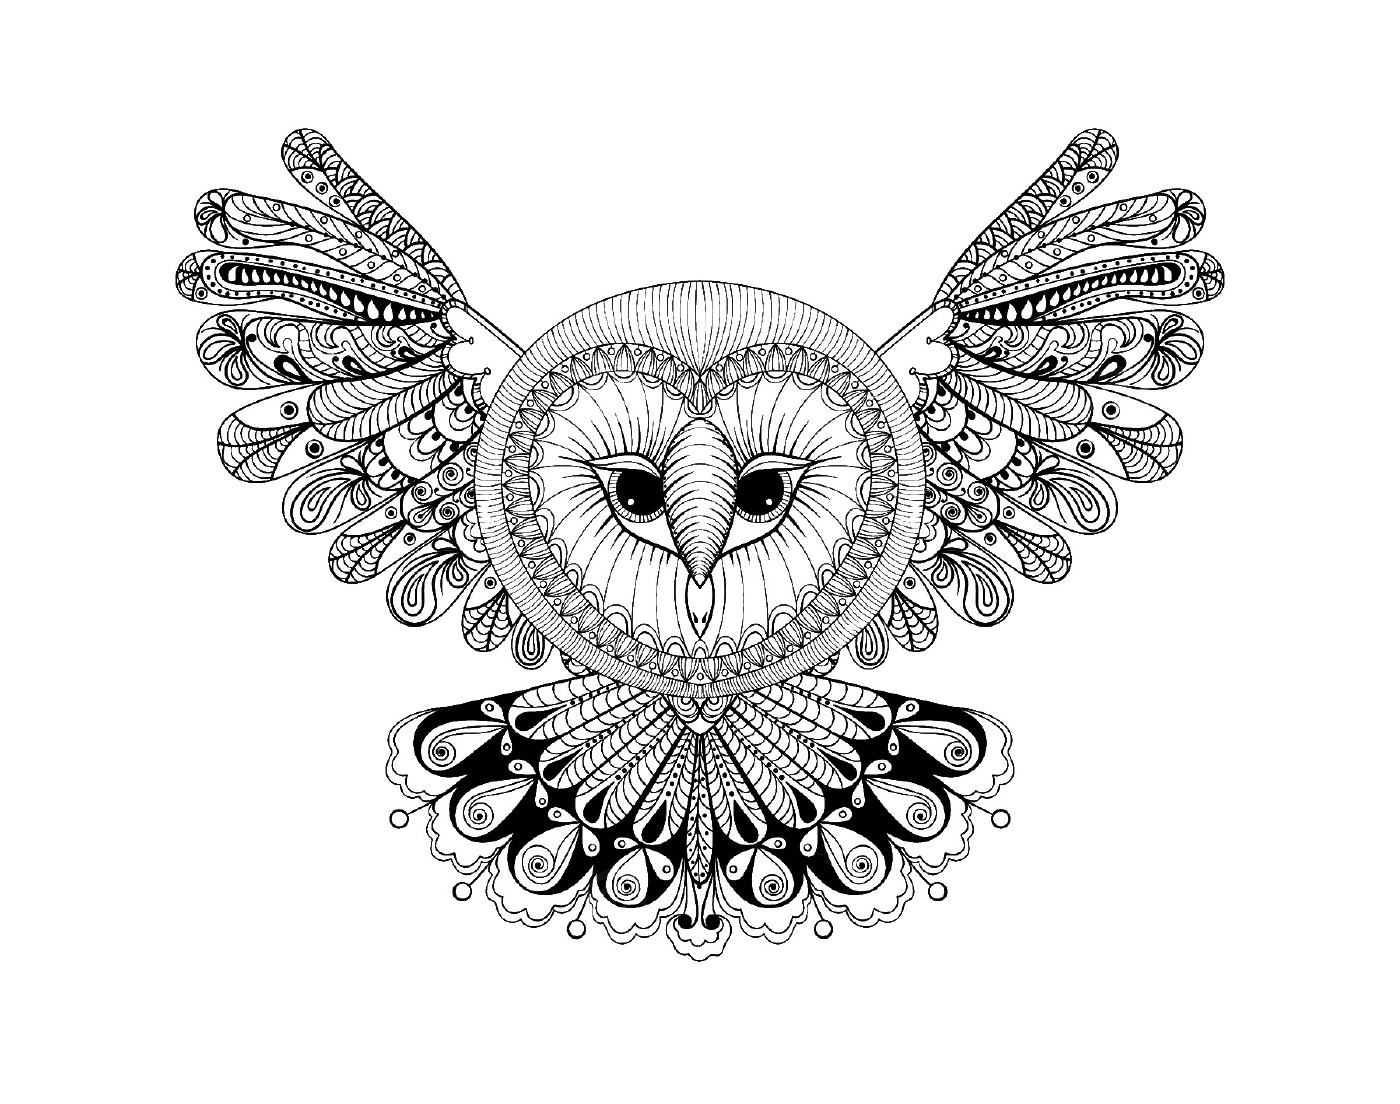  Owl with a large head and mandala pattern 